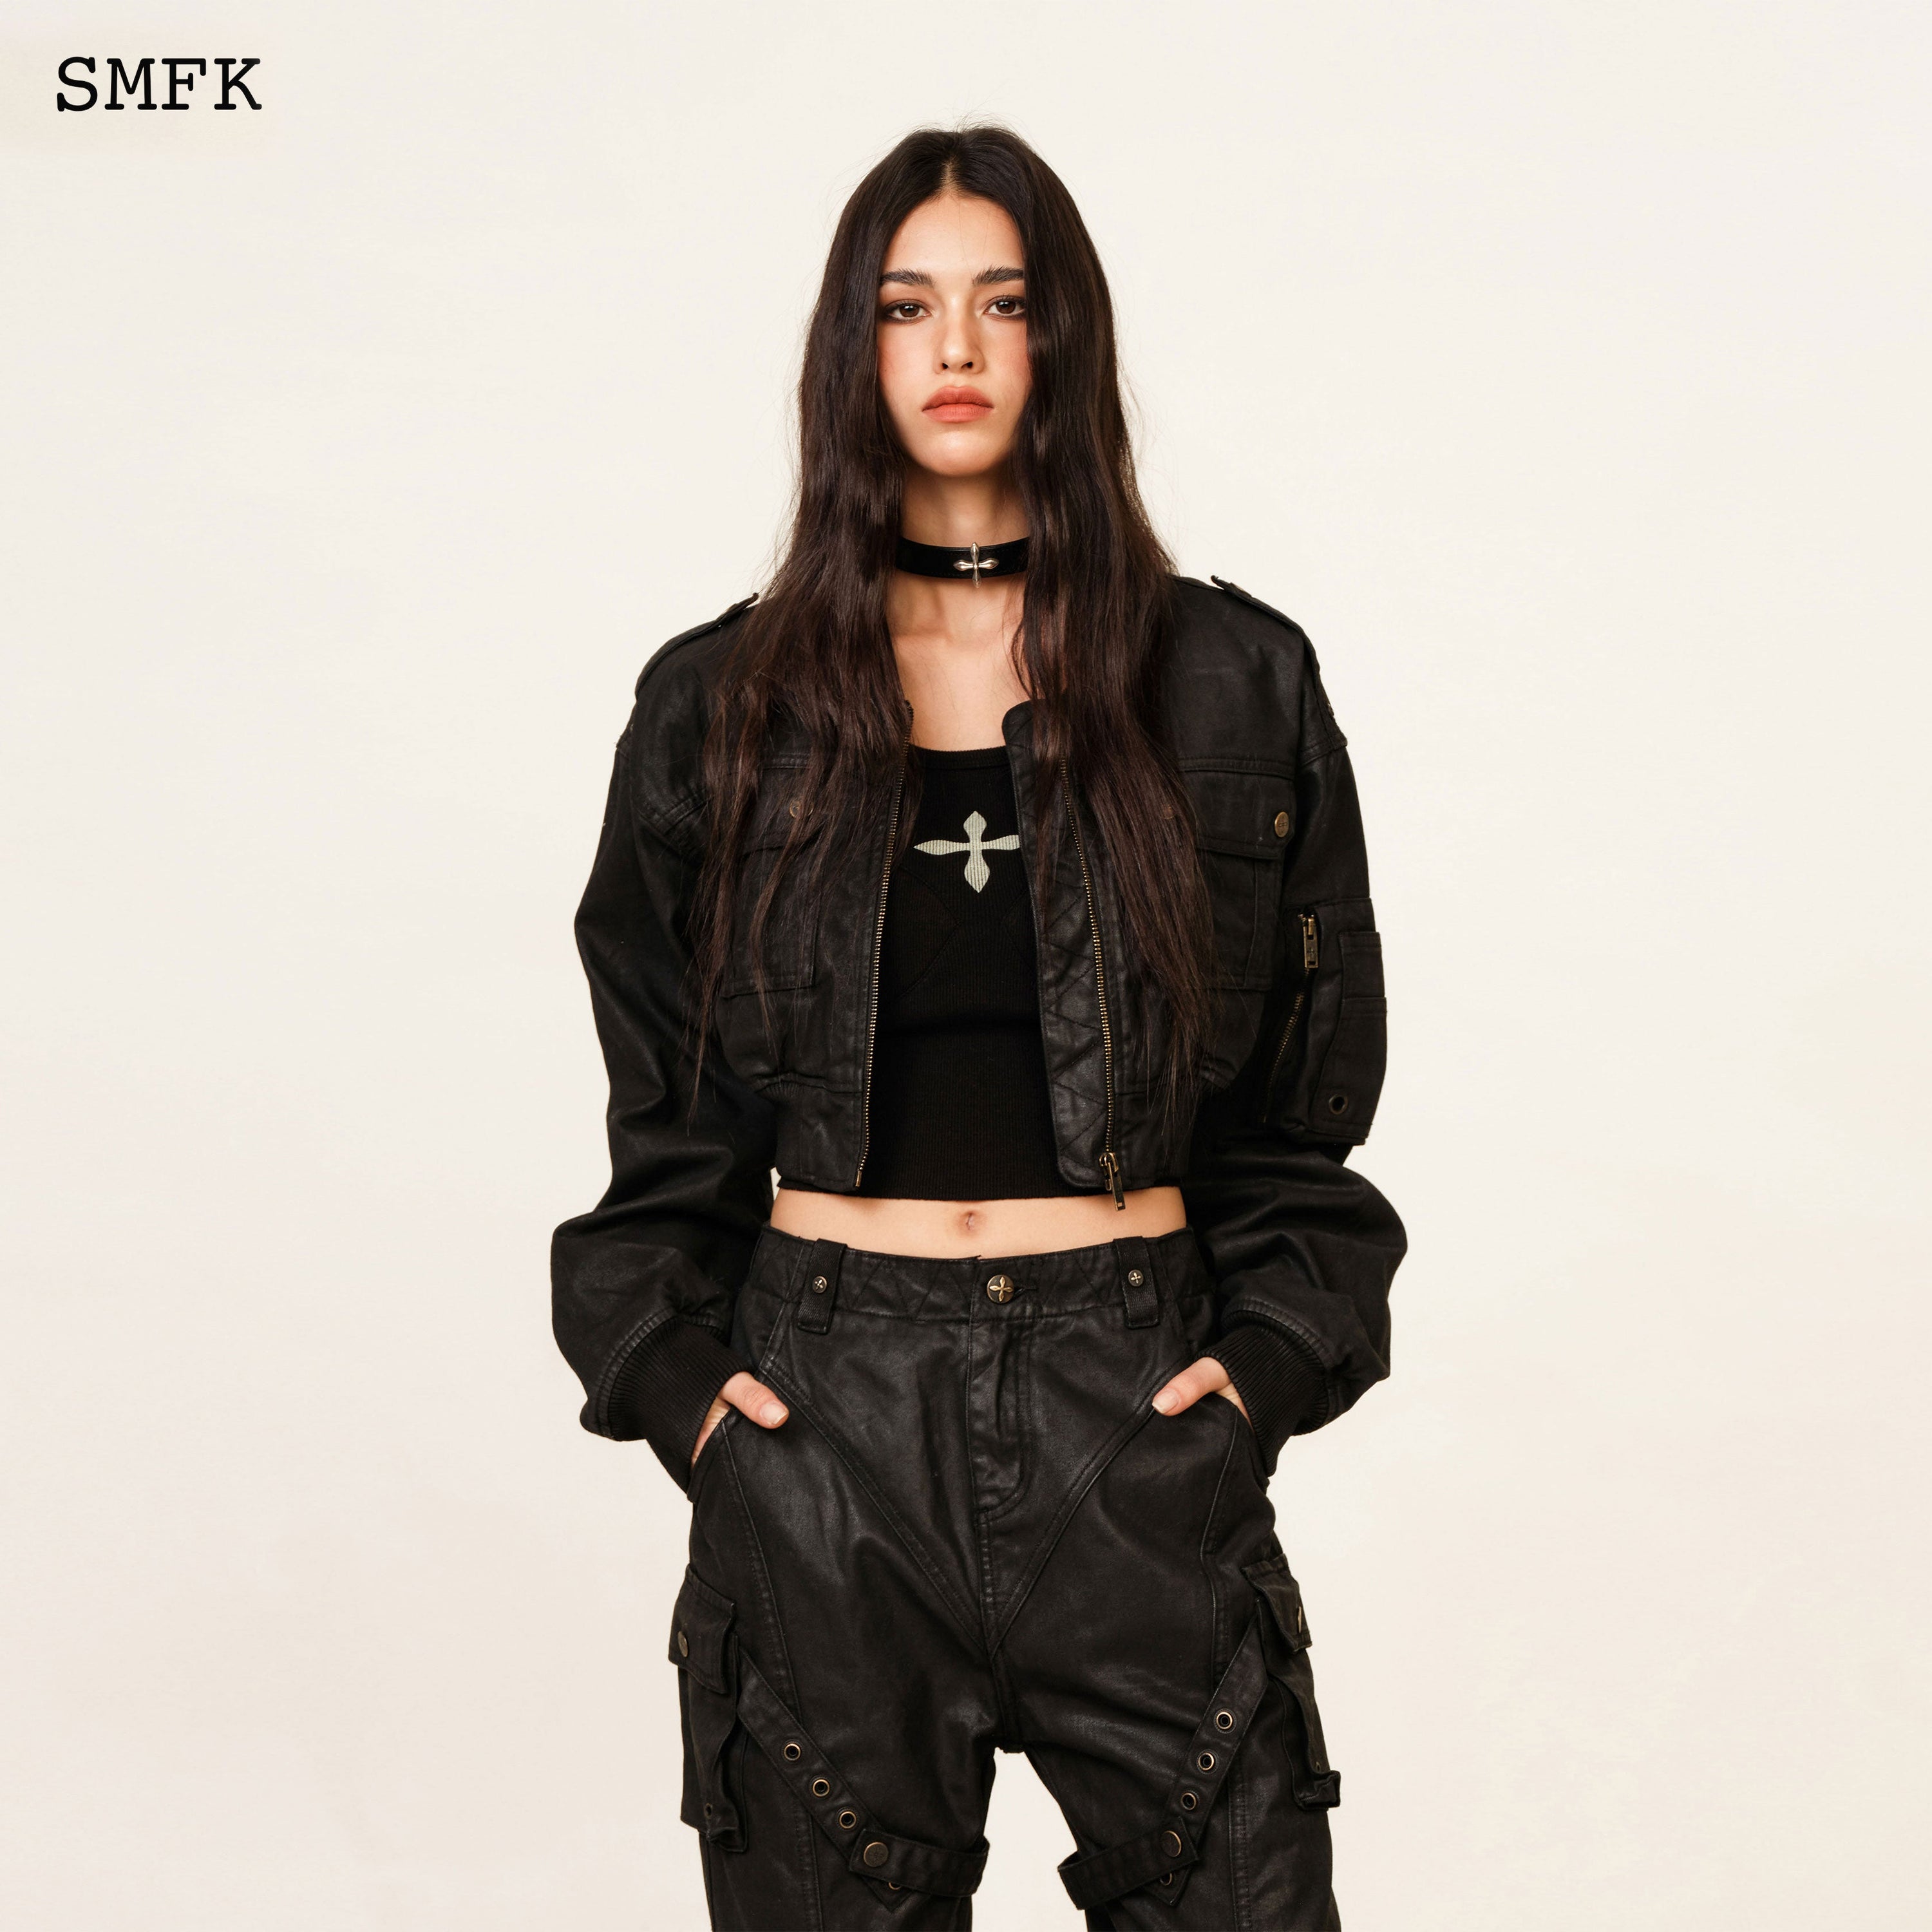 Compass Cross Leather Thick Choker In Black - SMFK Official